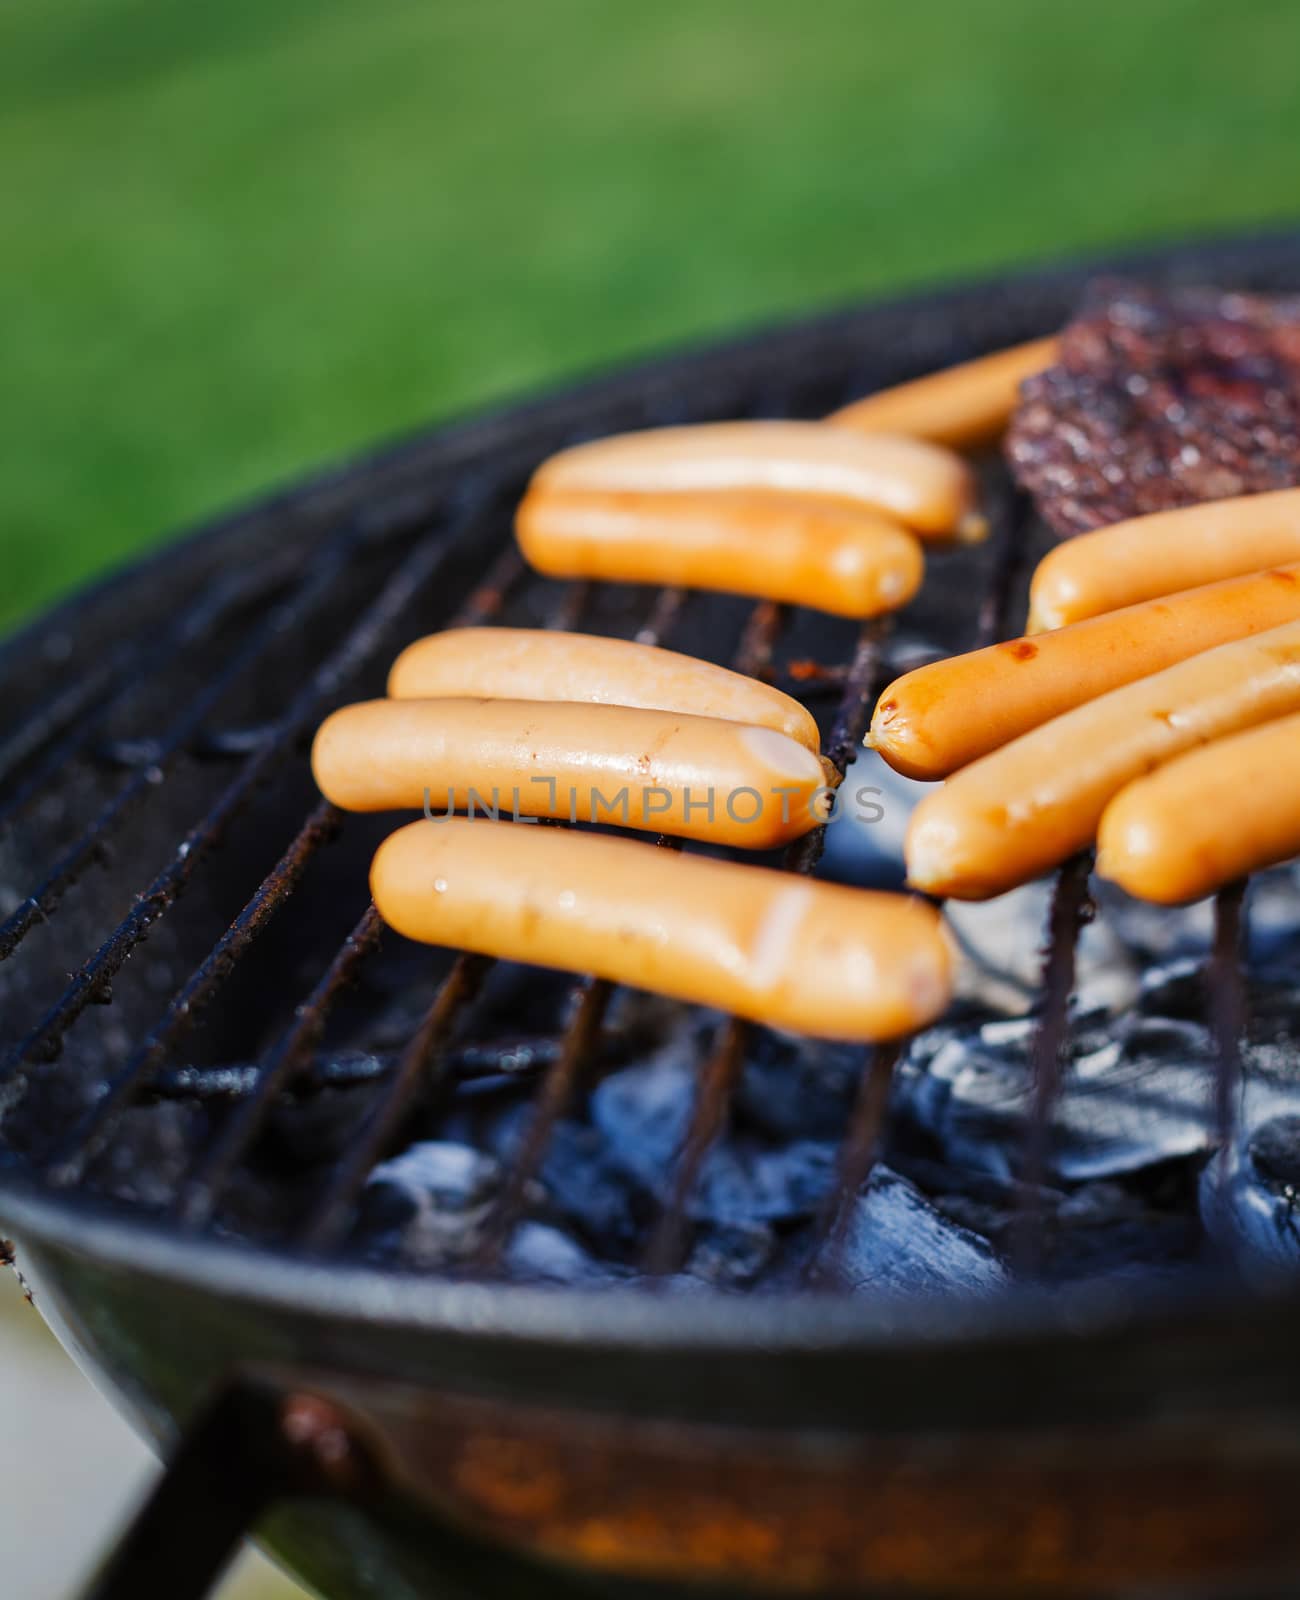 Fresh sausage and hot dogs grilling outdoors on a barbecue grill.